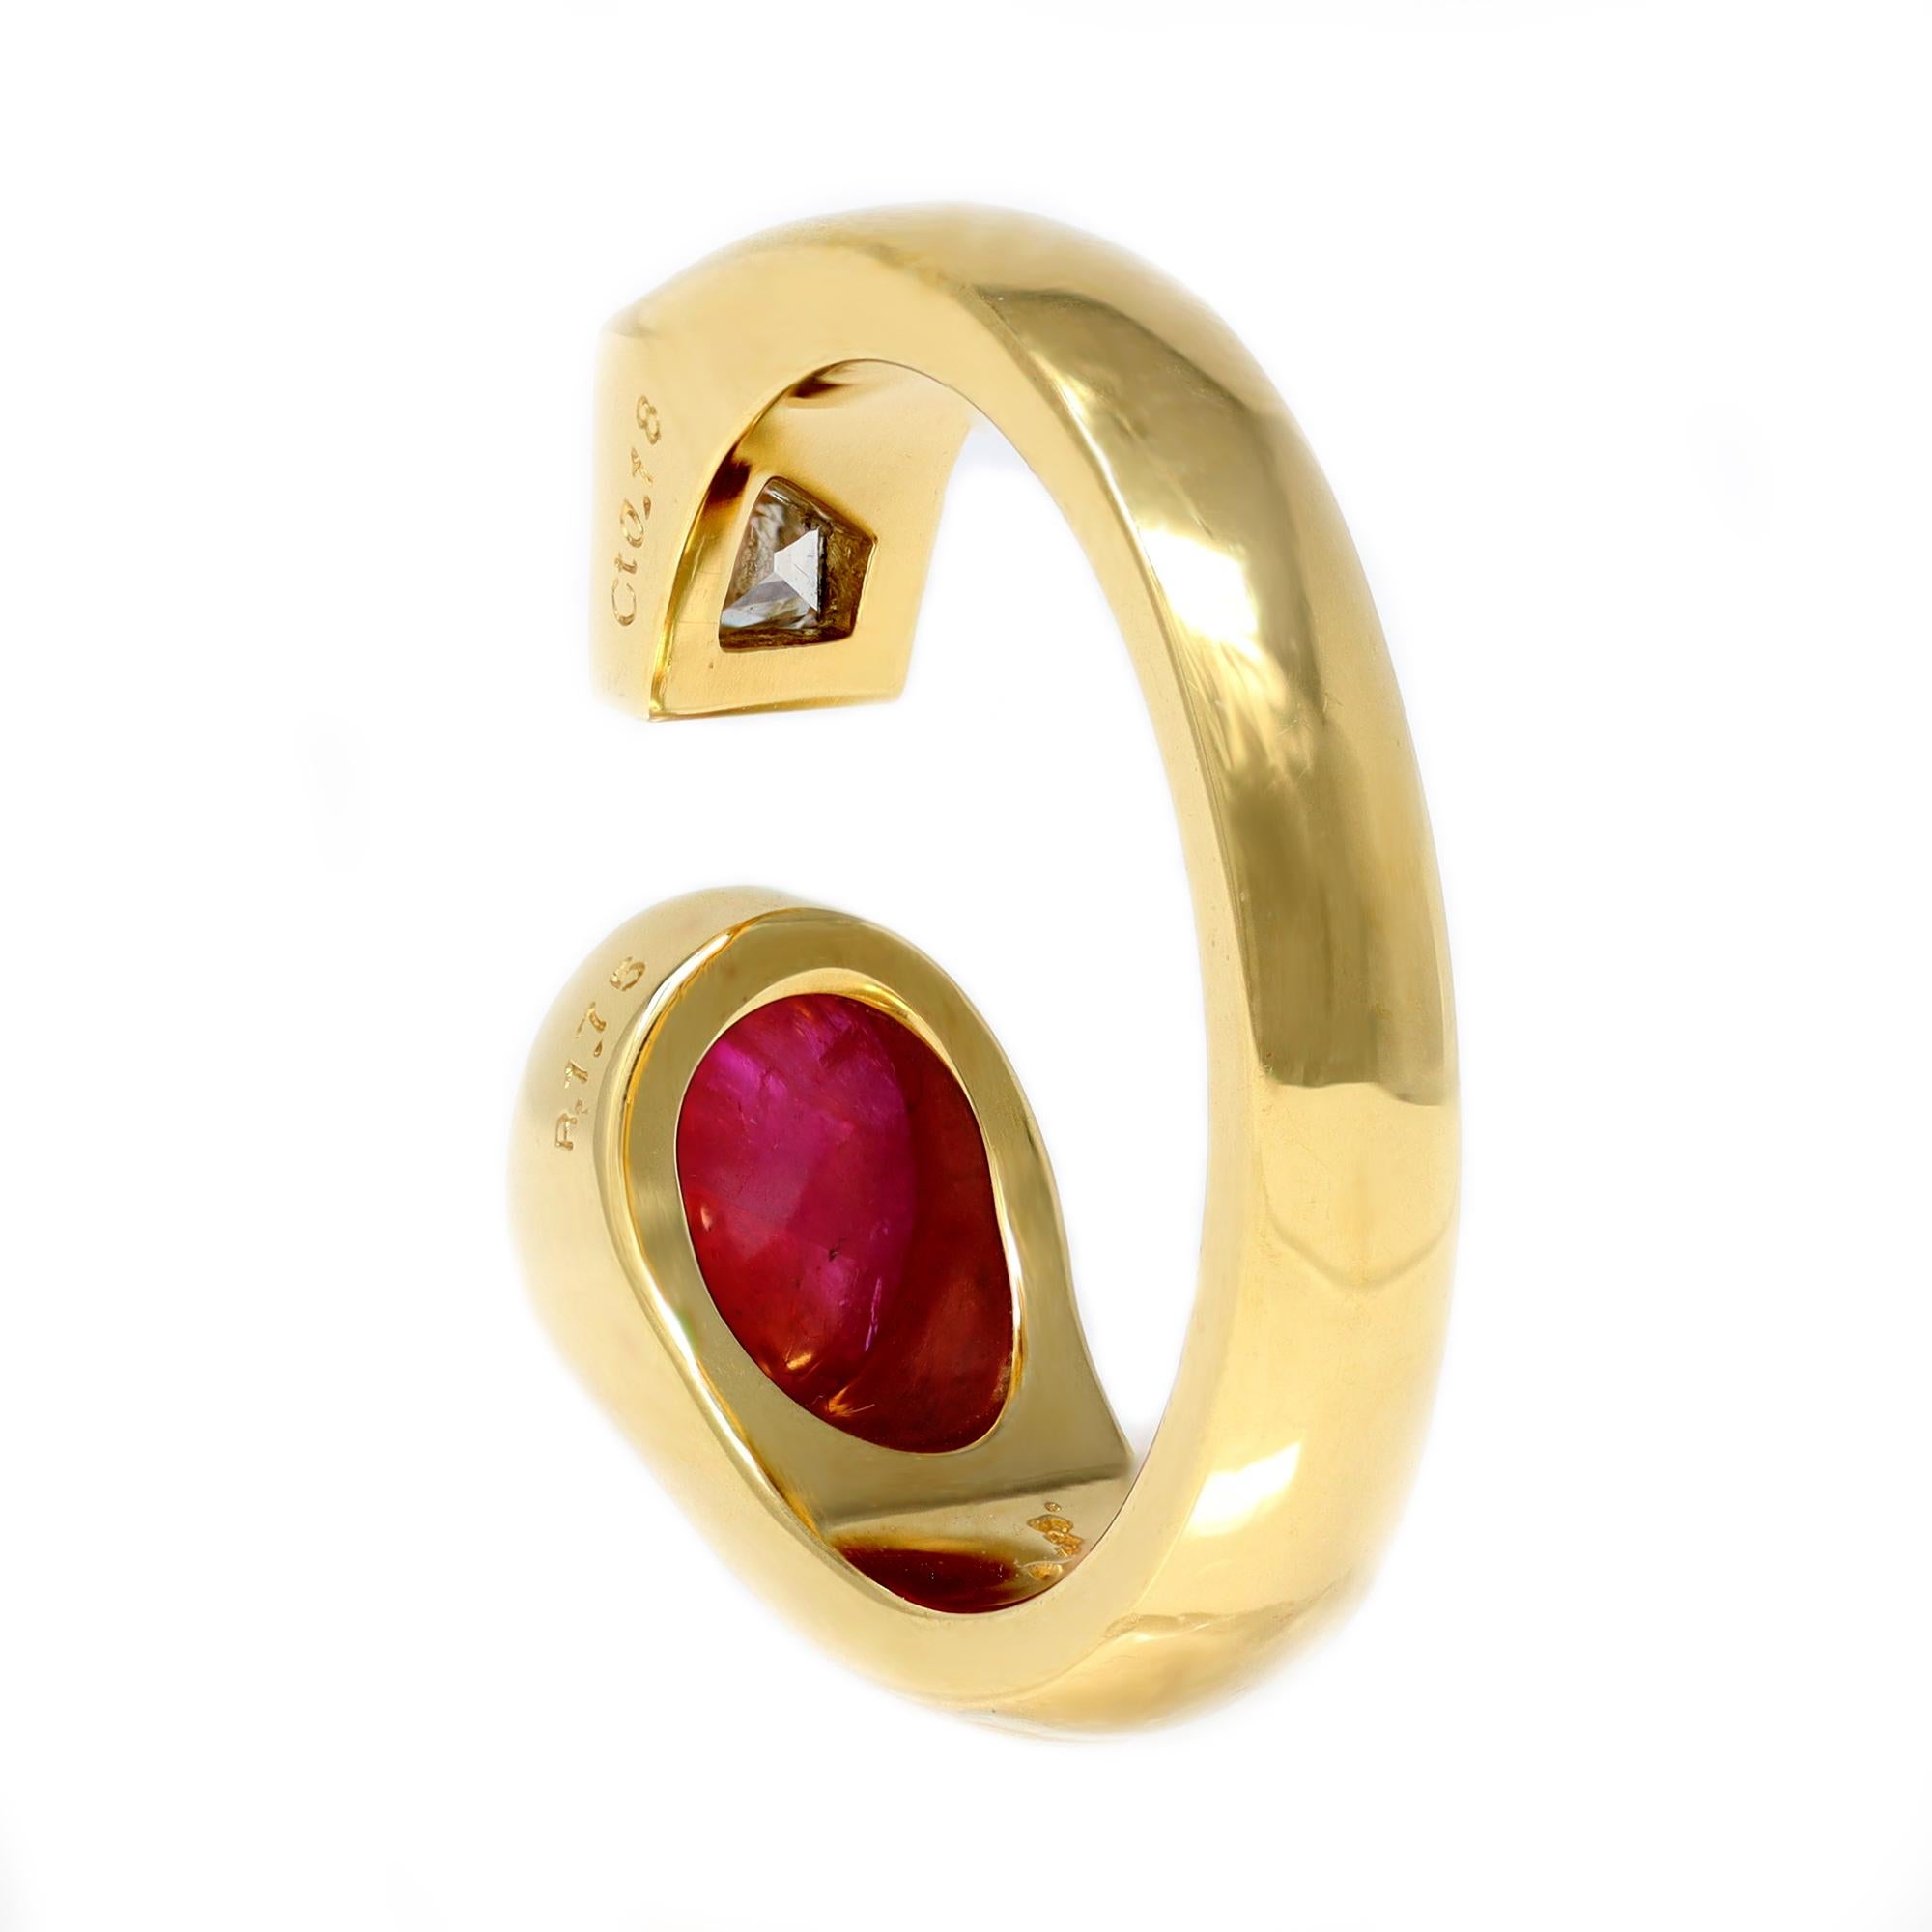 Aletto Brothers Cabochon Ruby, Sapphire & Fancy-Cut Diamond Ring Set 1